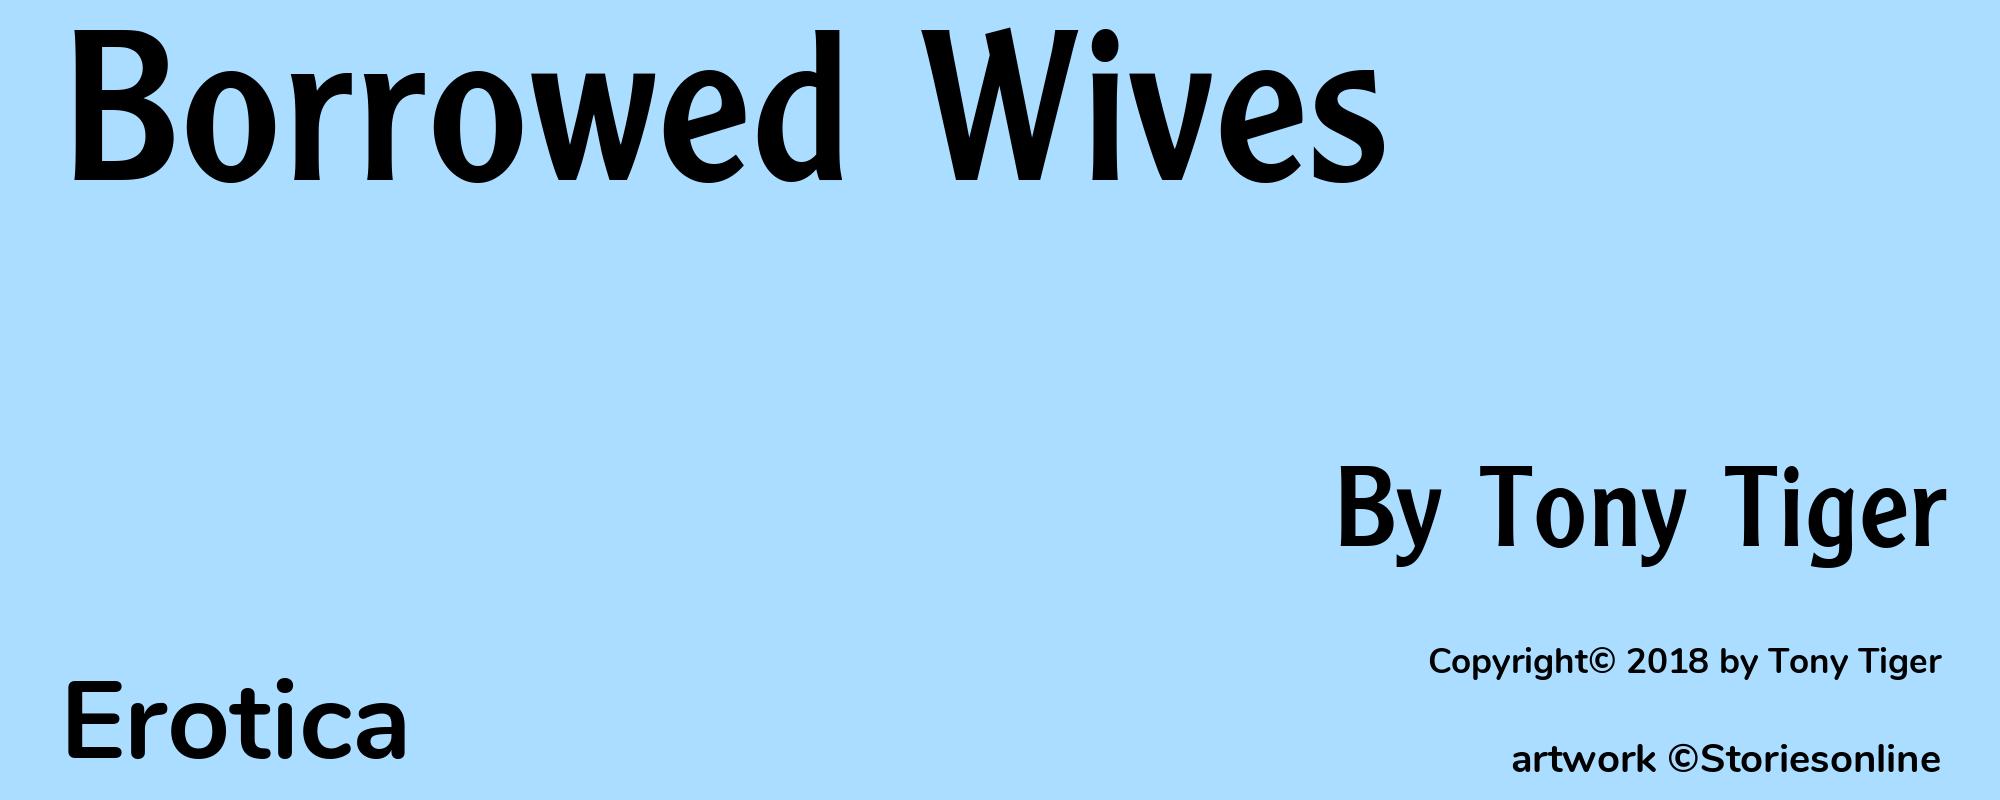 Borrowed Wives - Cover